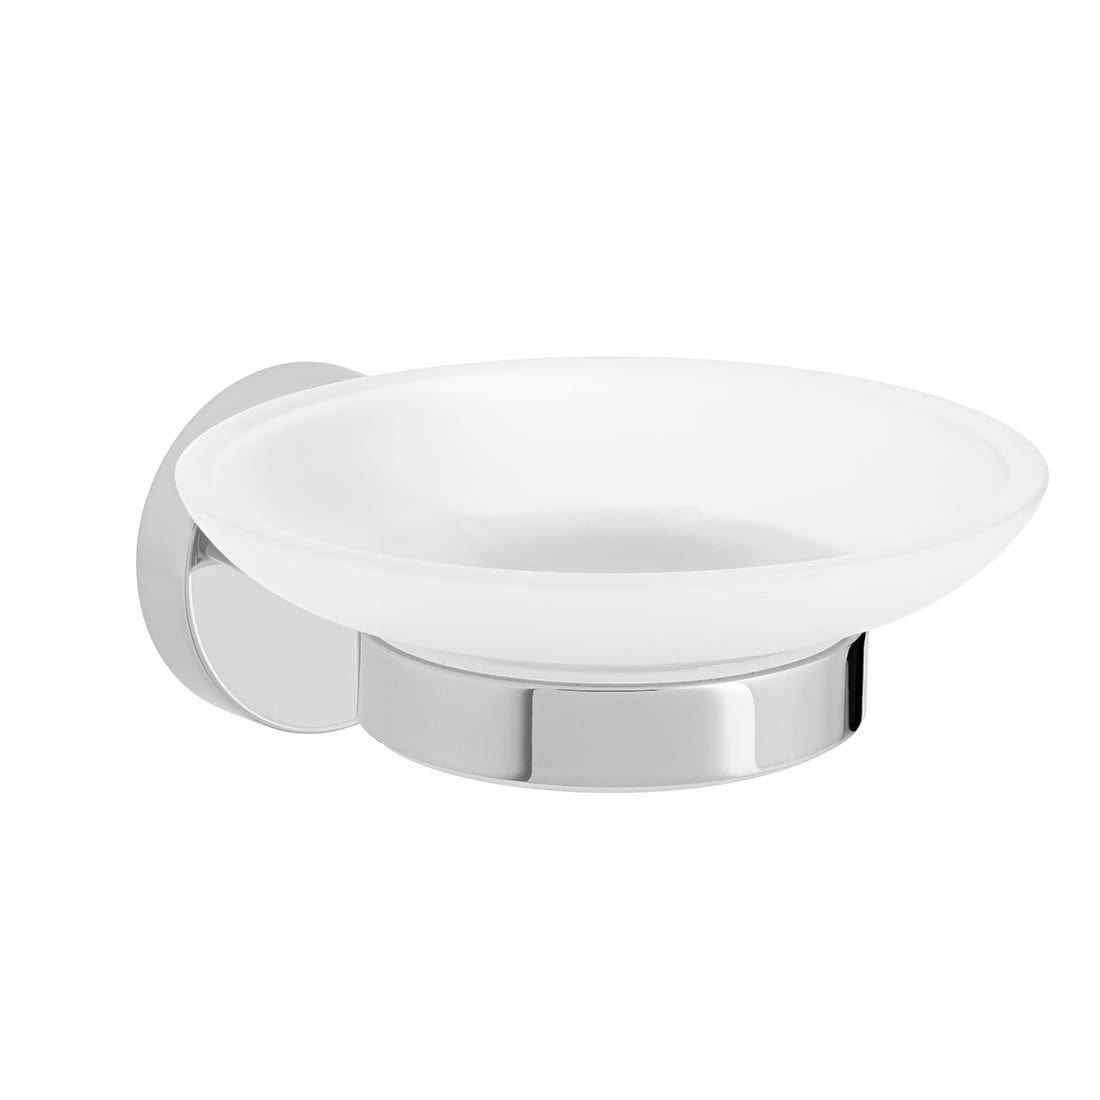 Vado Sirkel Frosted Glass Soap Dish & Holder - AX-SIR-182-CP | Supply Master | Accra, Ghana Building Material Building Steel Engineering Hardware tool